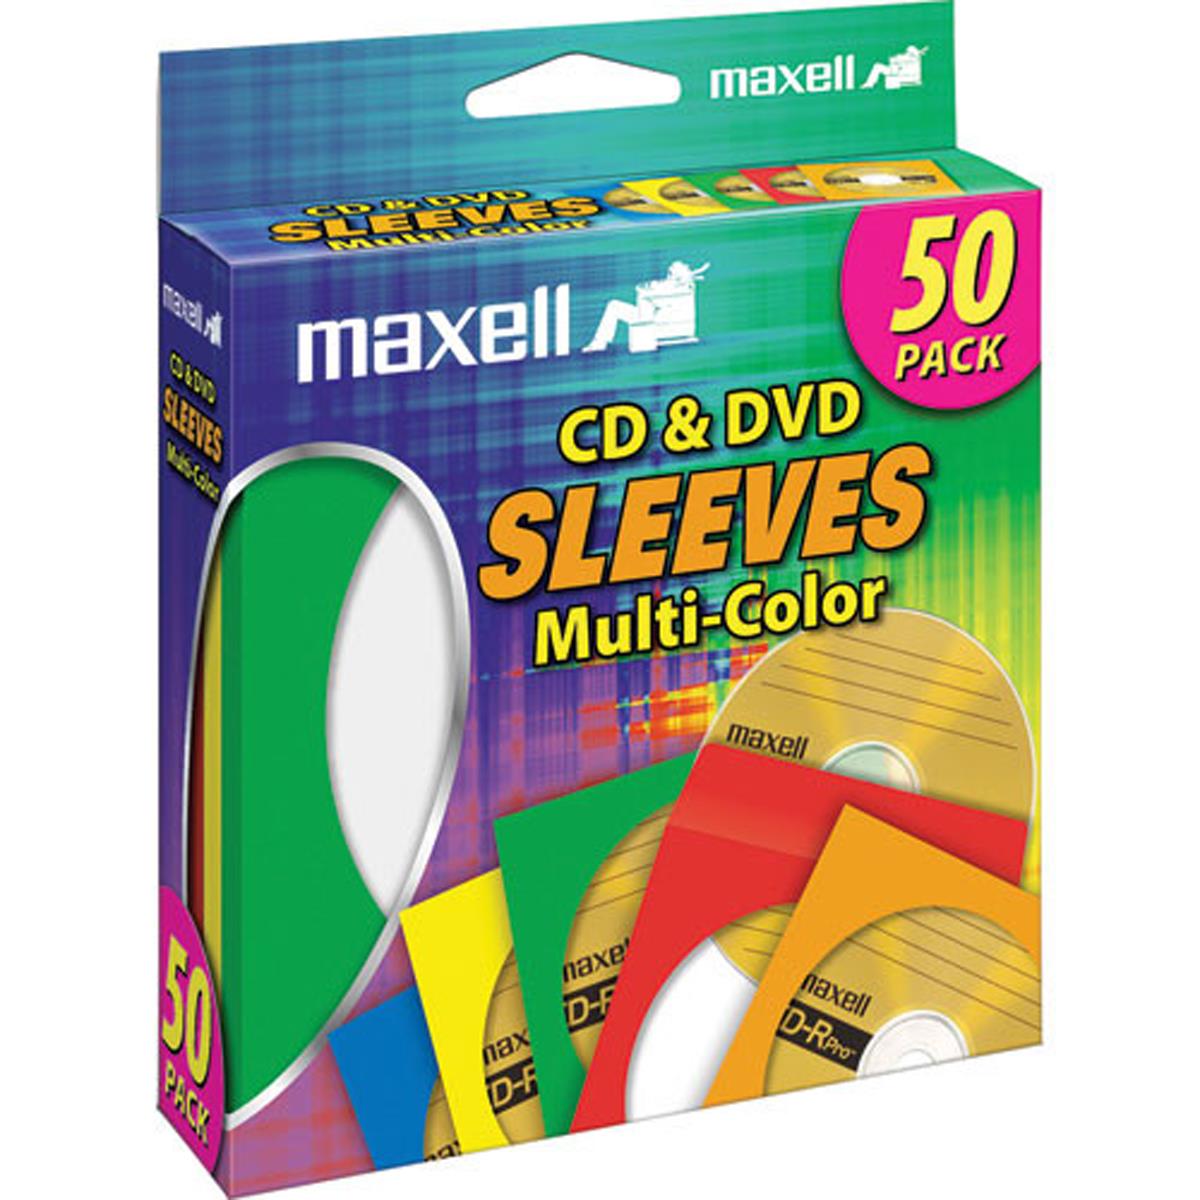 Image of Maxell CD &amp; DVD Sleeves Muti-Color 50-Pack